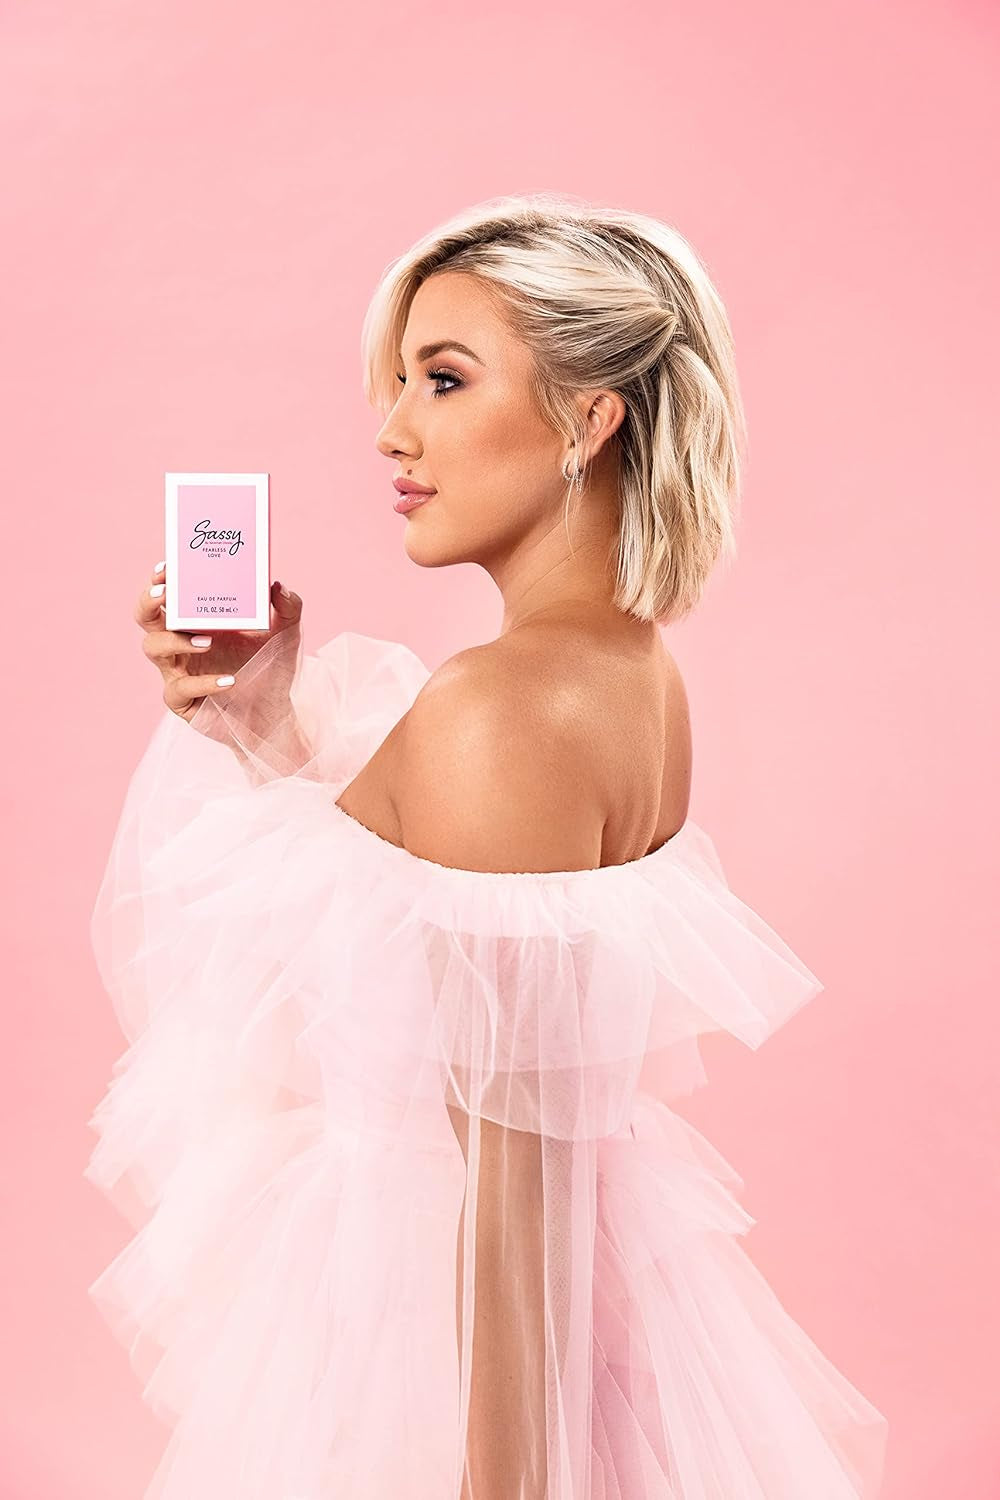 Sassy by Savannah Chrisley Fearless Love - Perfume for Women - Floral Woody Musk Fragrance - Opens with Notes of Litchi and Red Fruits - for Ladies with Endless Affection - 1.7 oz EDP Spray